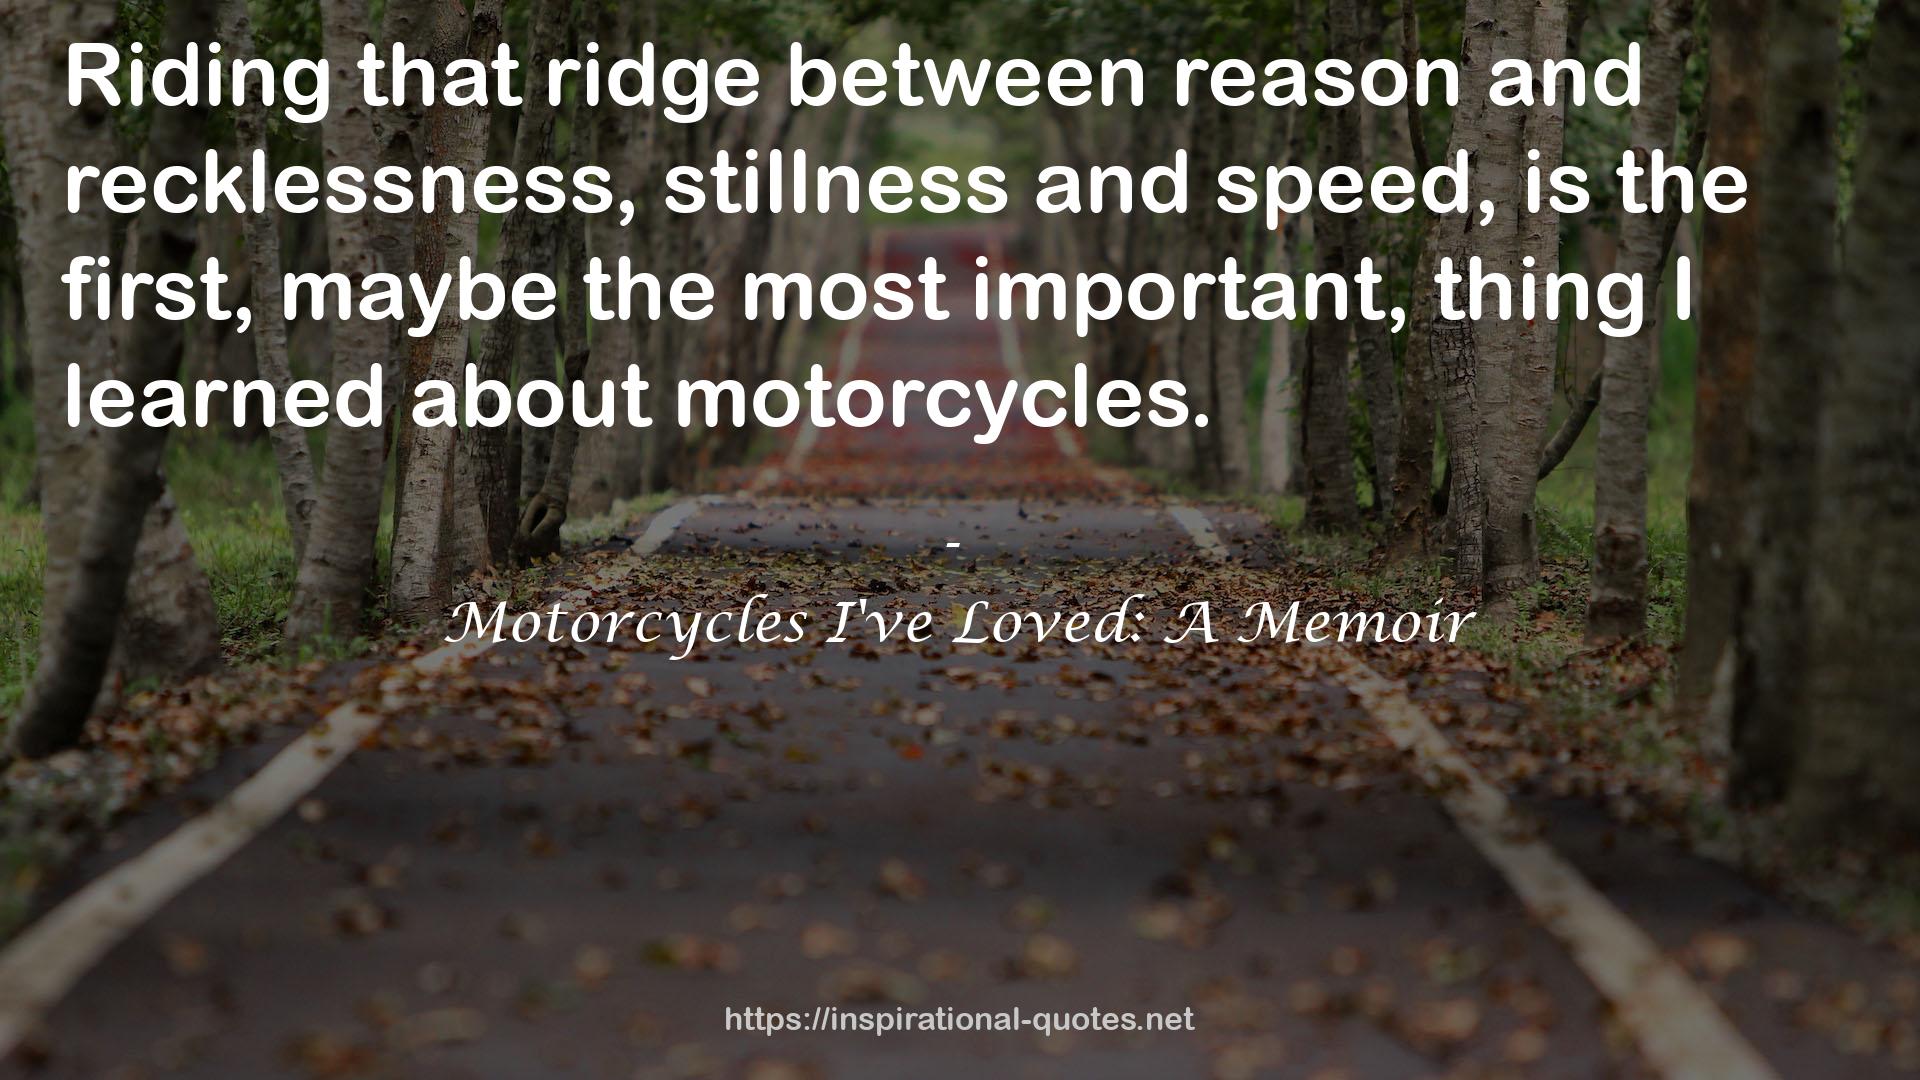 Motorcycles I've Loved: A Memoir QUOTES